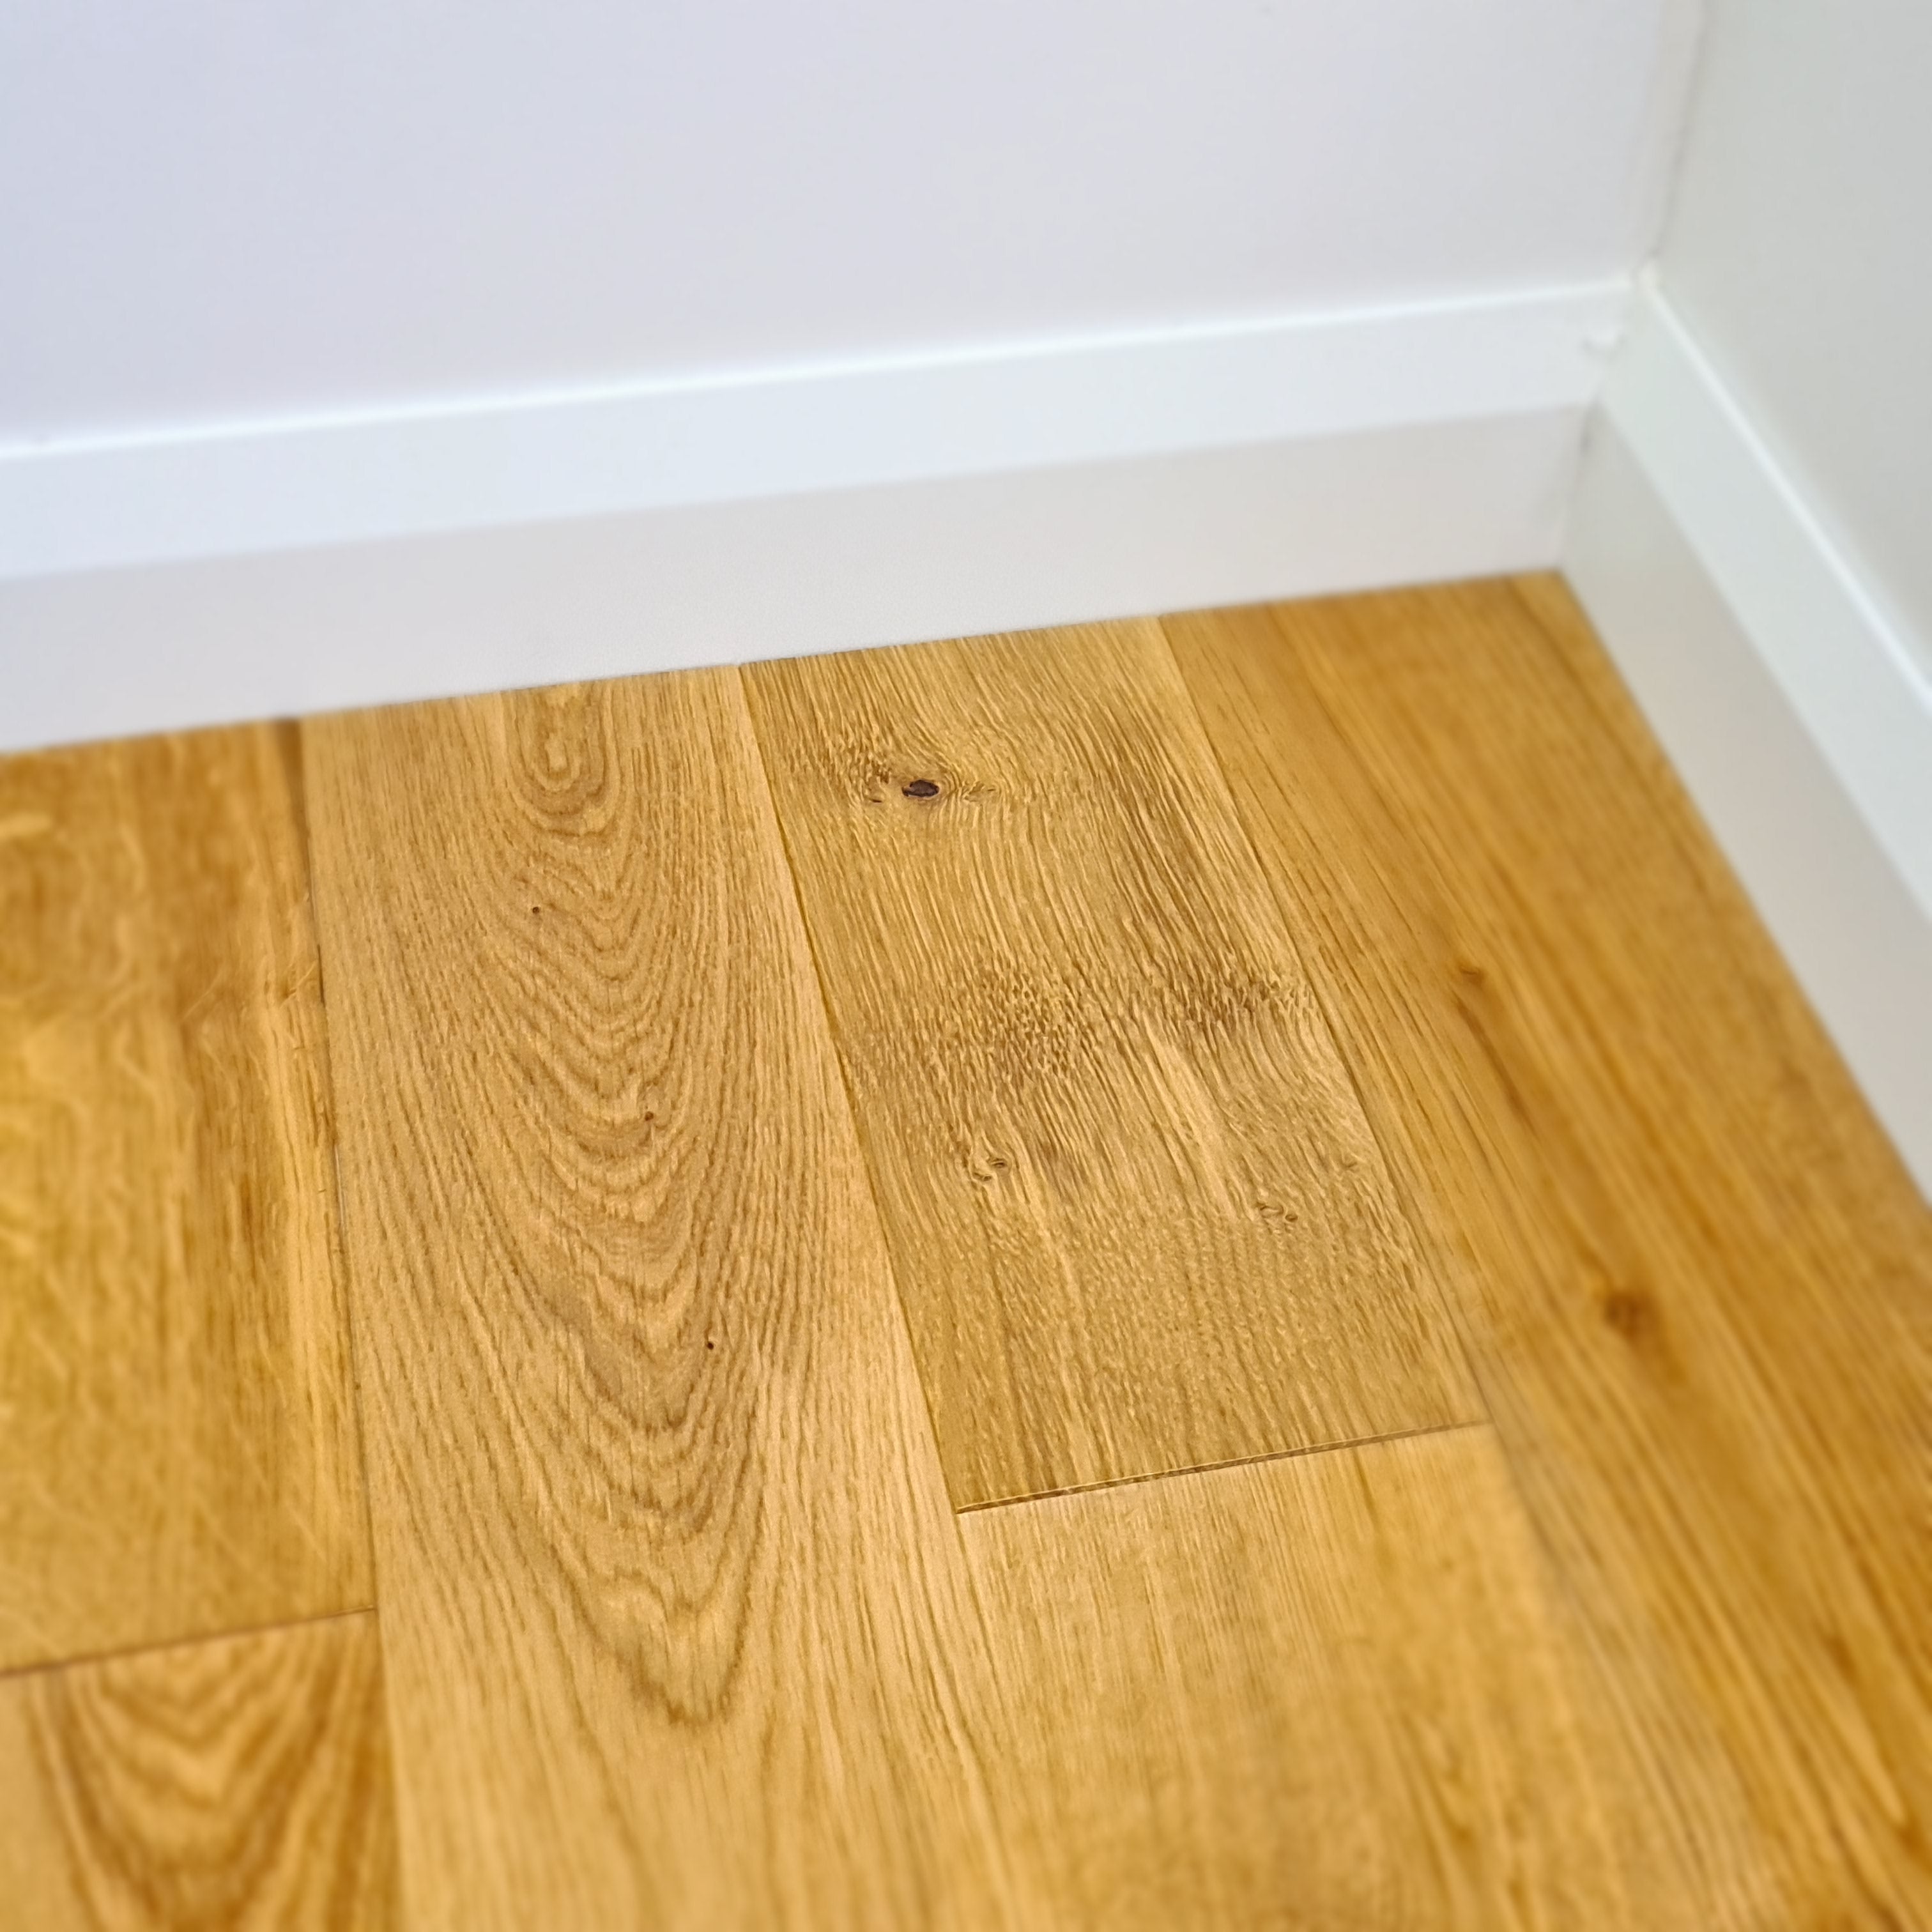 TimberFloor Natural Oak Brushed & Lacquered 125mm Engineered Flooring   £39.95m2